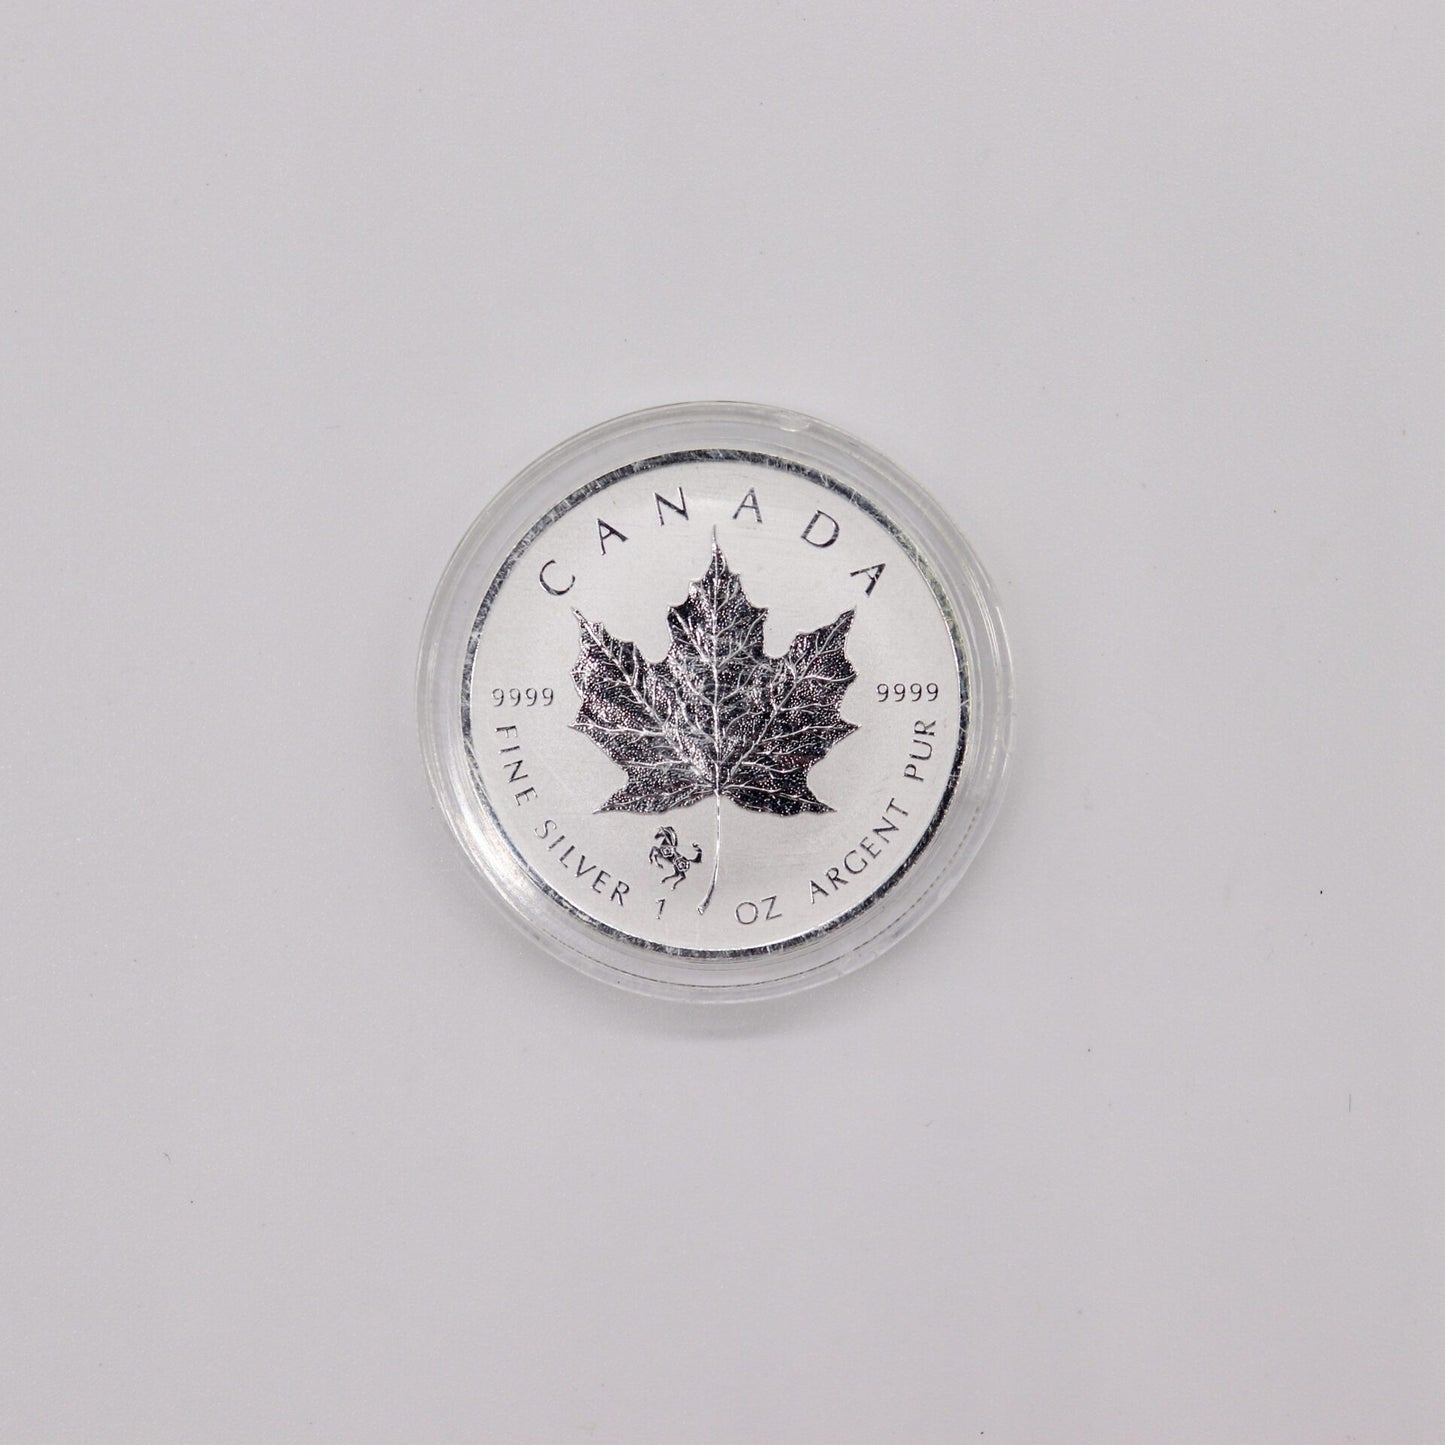 2014 Reverse Proof $5 Canadian Maple Leaf One Ounce Silver Coin, Gem Mint